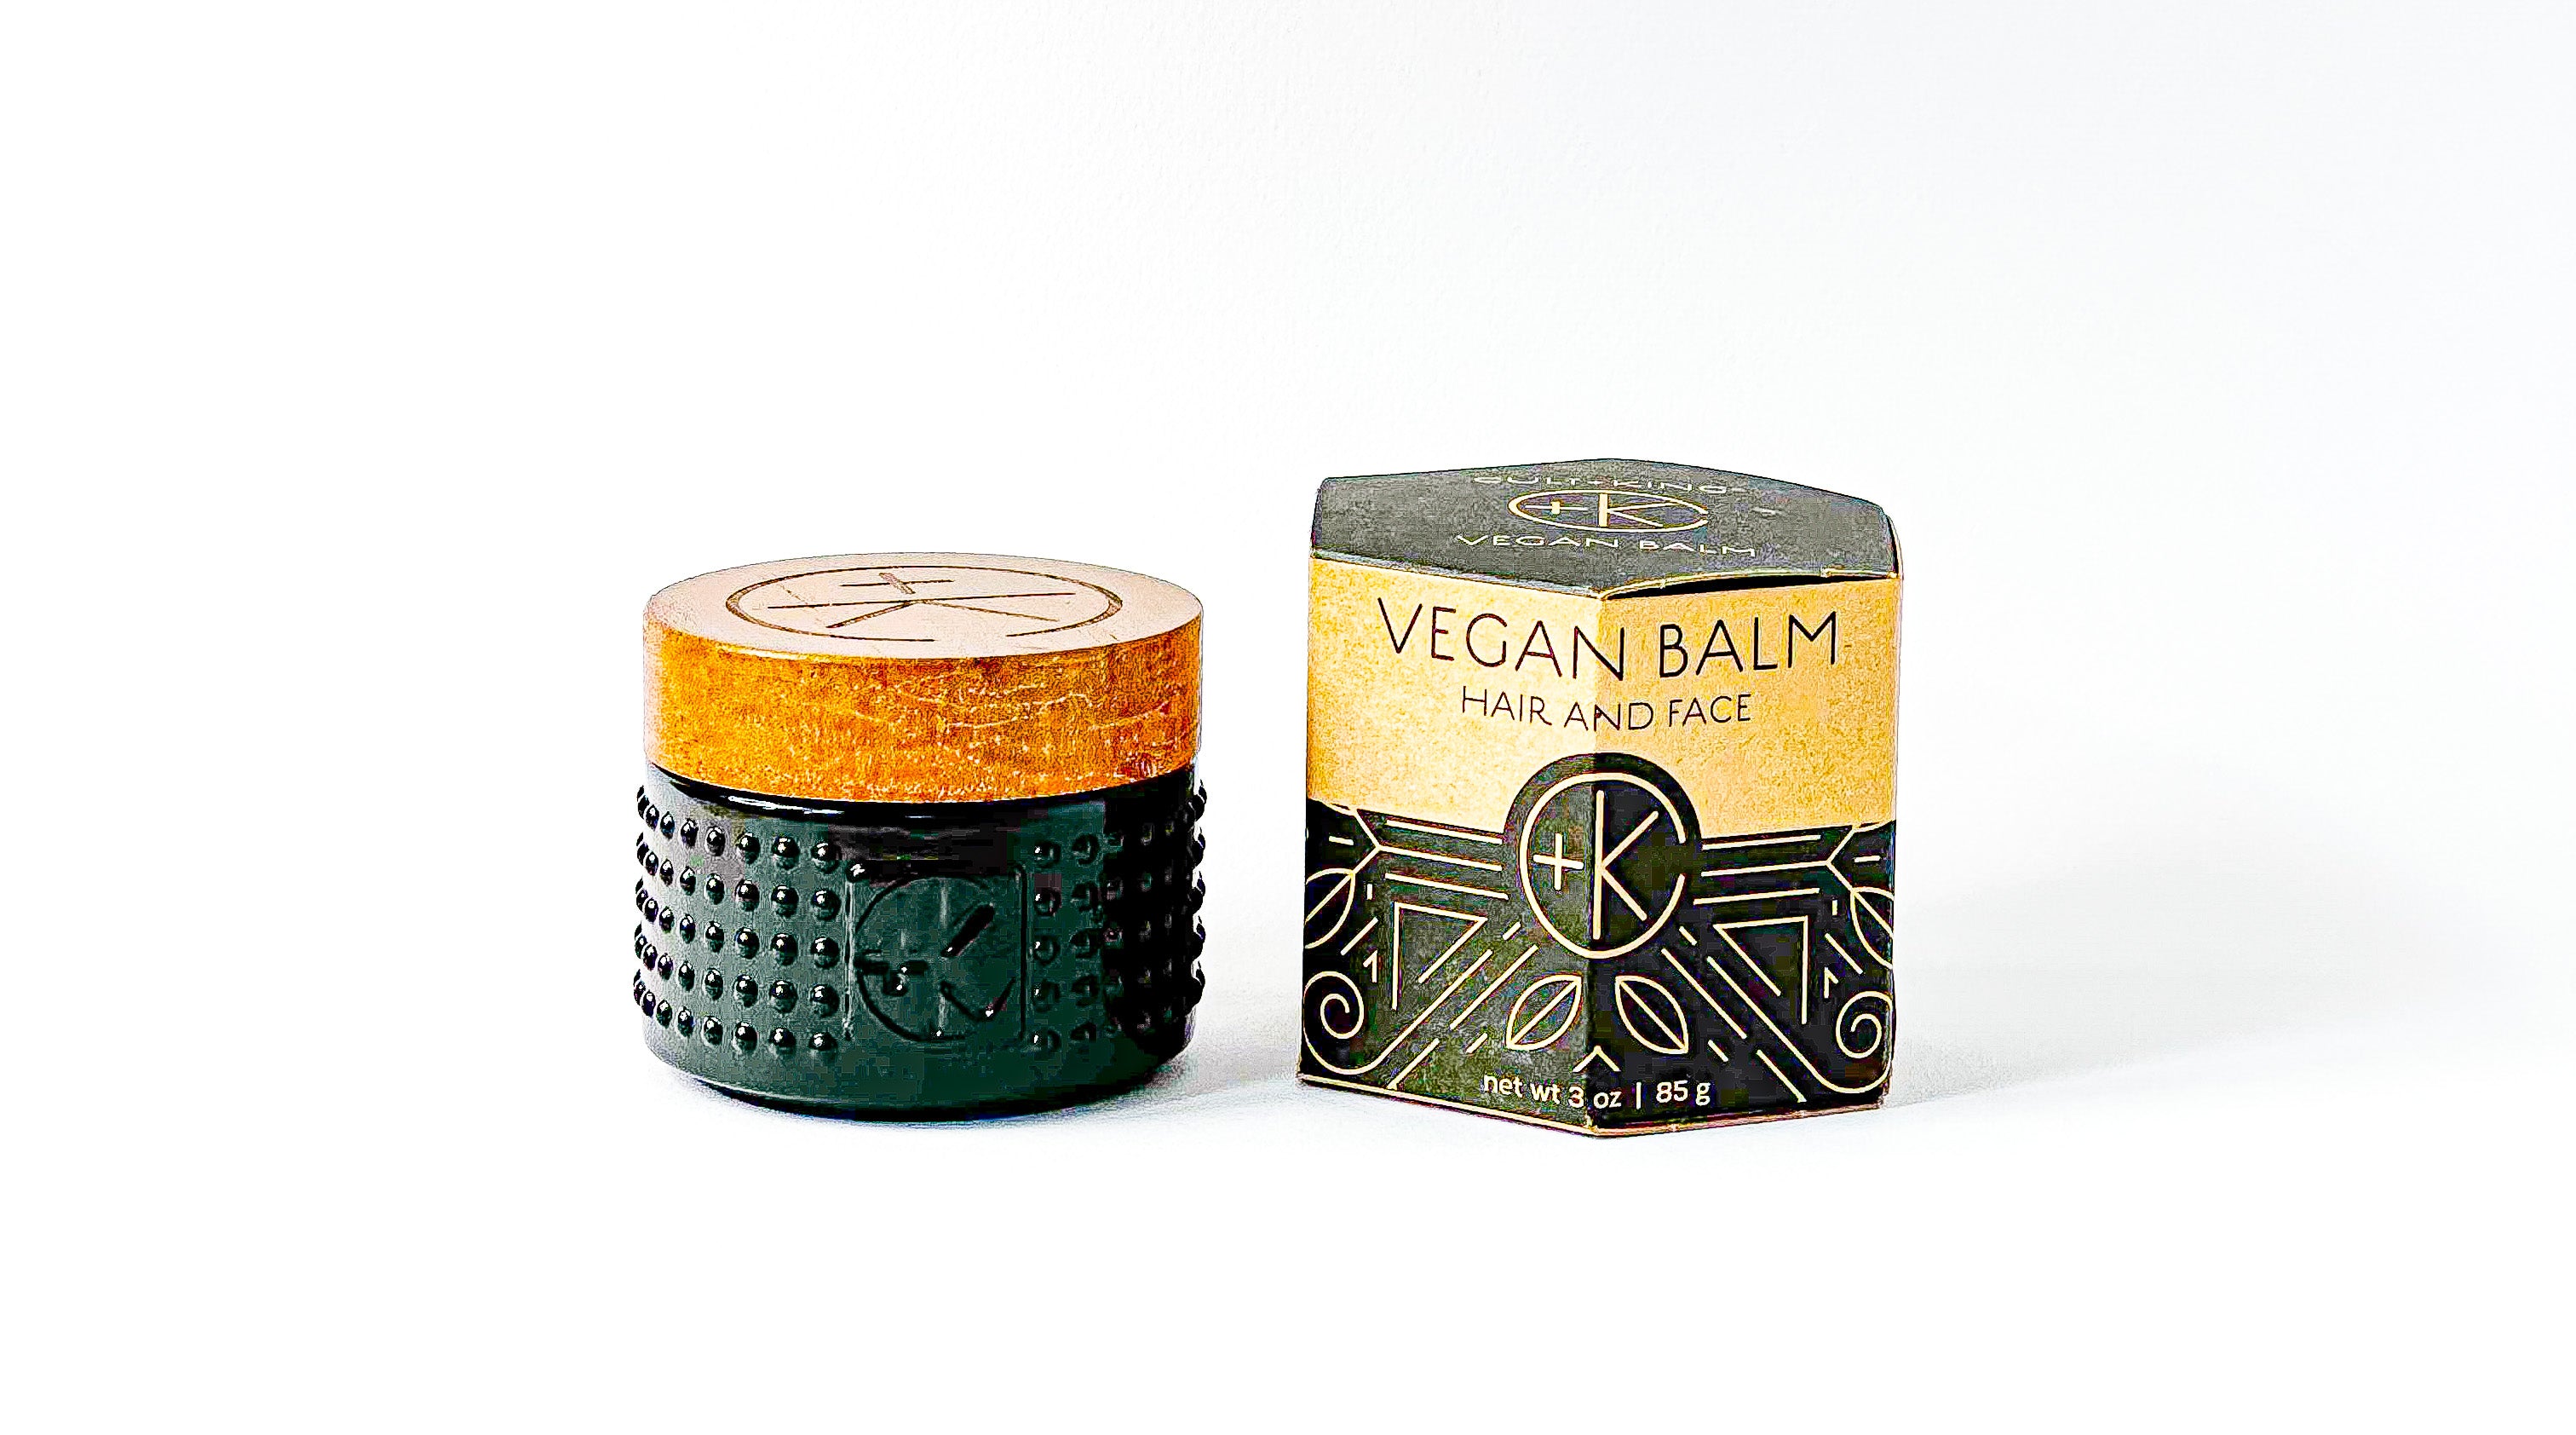 
  
  Cult + King Vegan Balm Manifest Moisture for Hair Styling + Face- LORDE beauty and cosmetics
  
